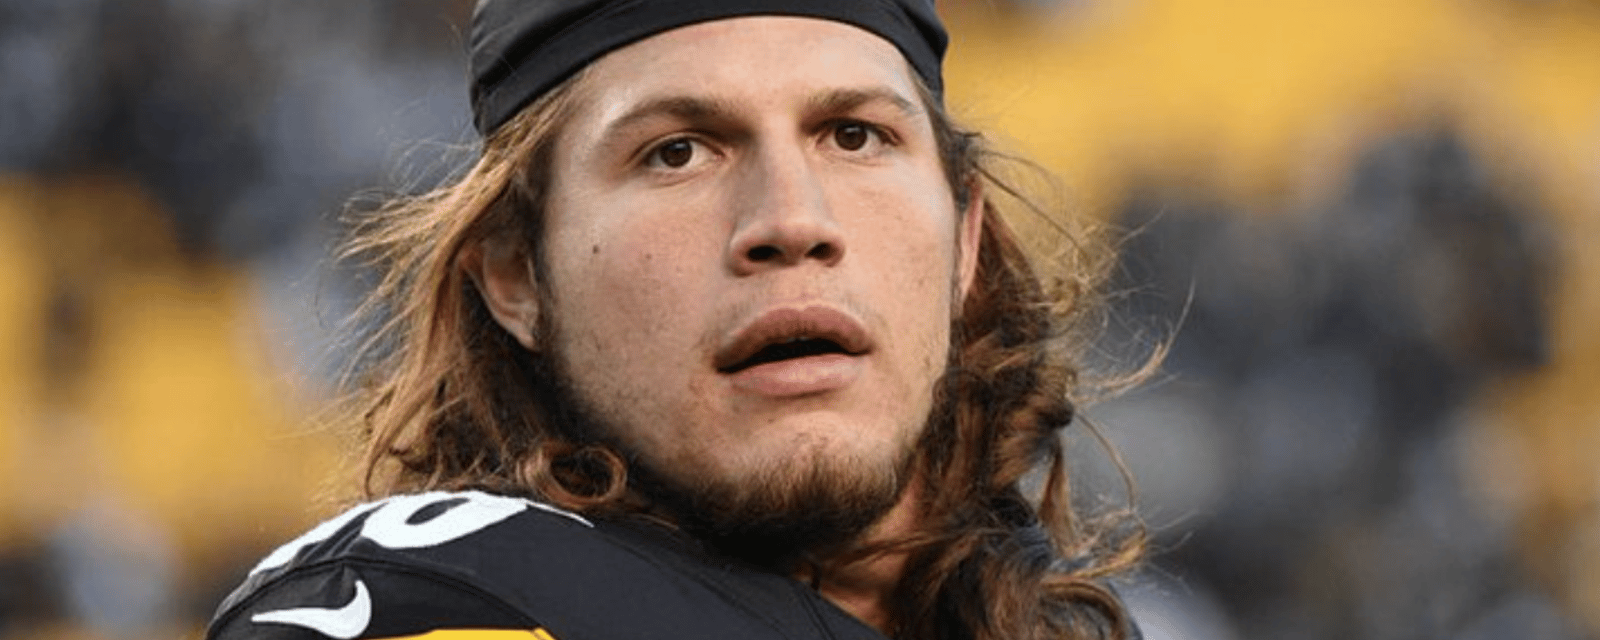 Ex-Steelers LB Anthony Chickillo tased by police 